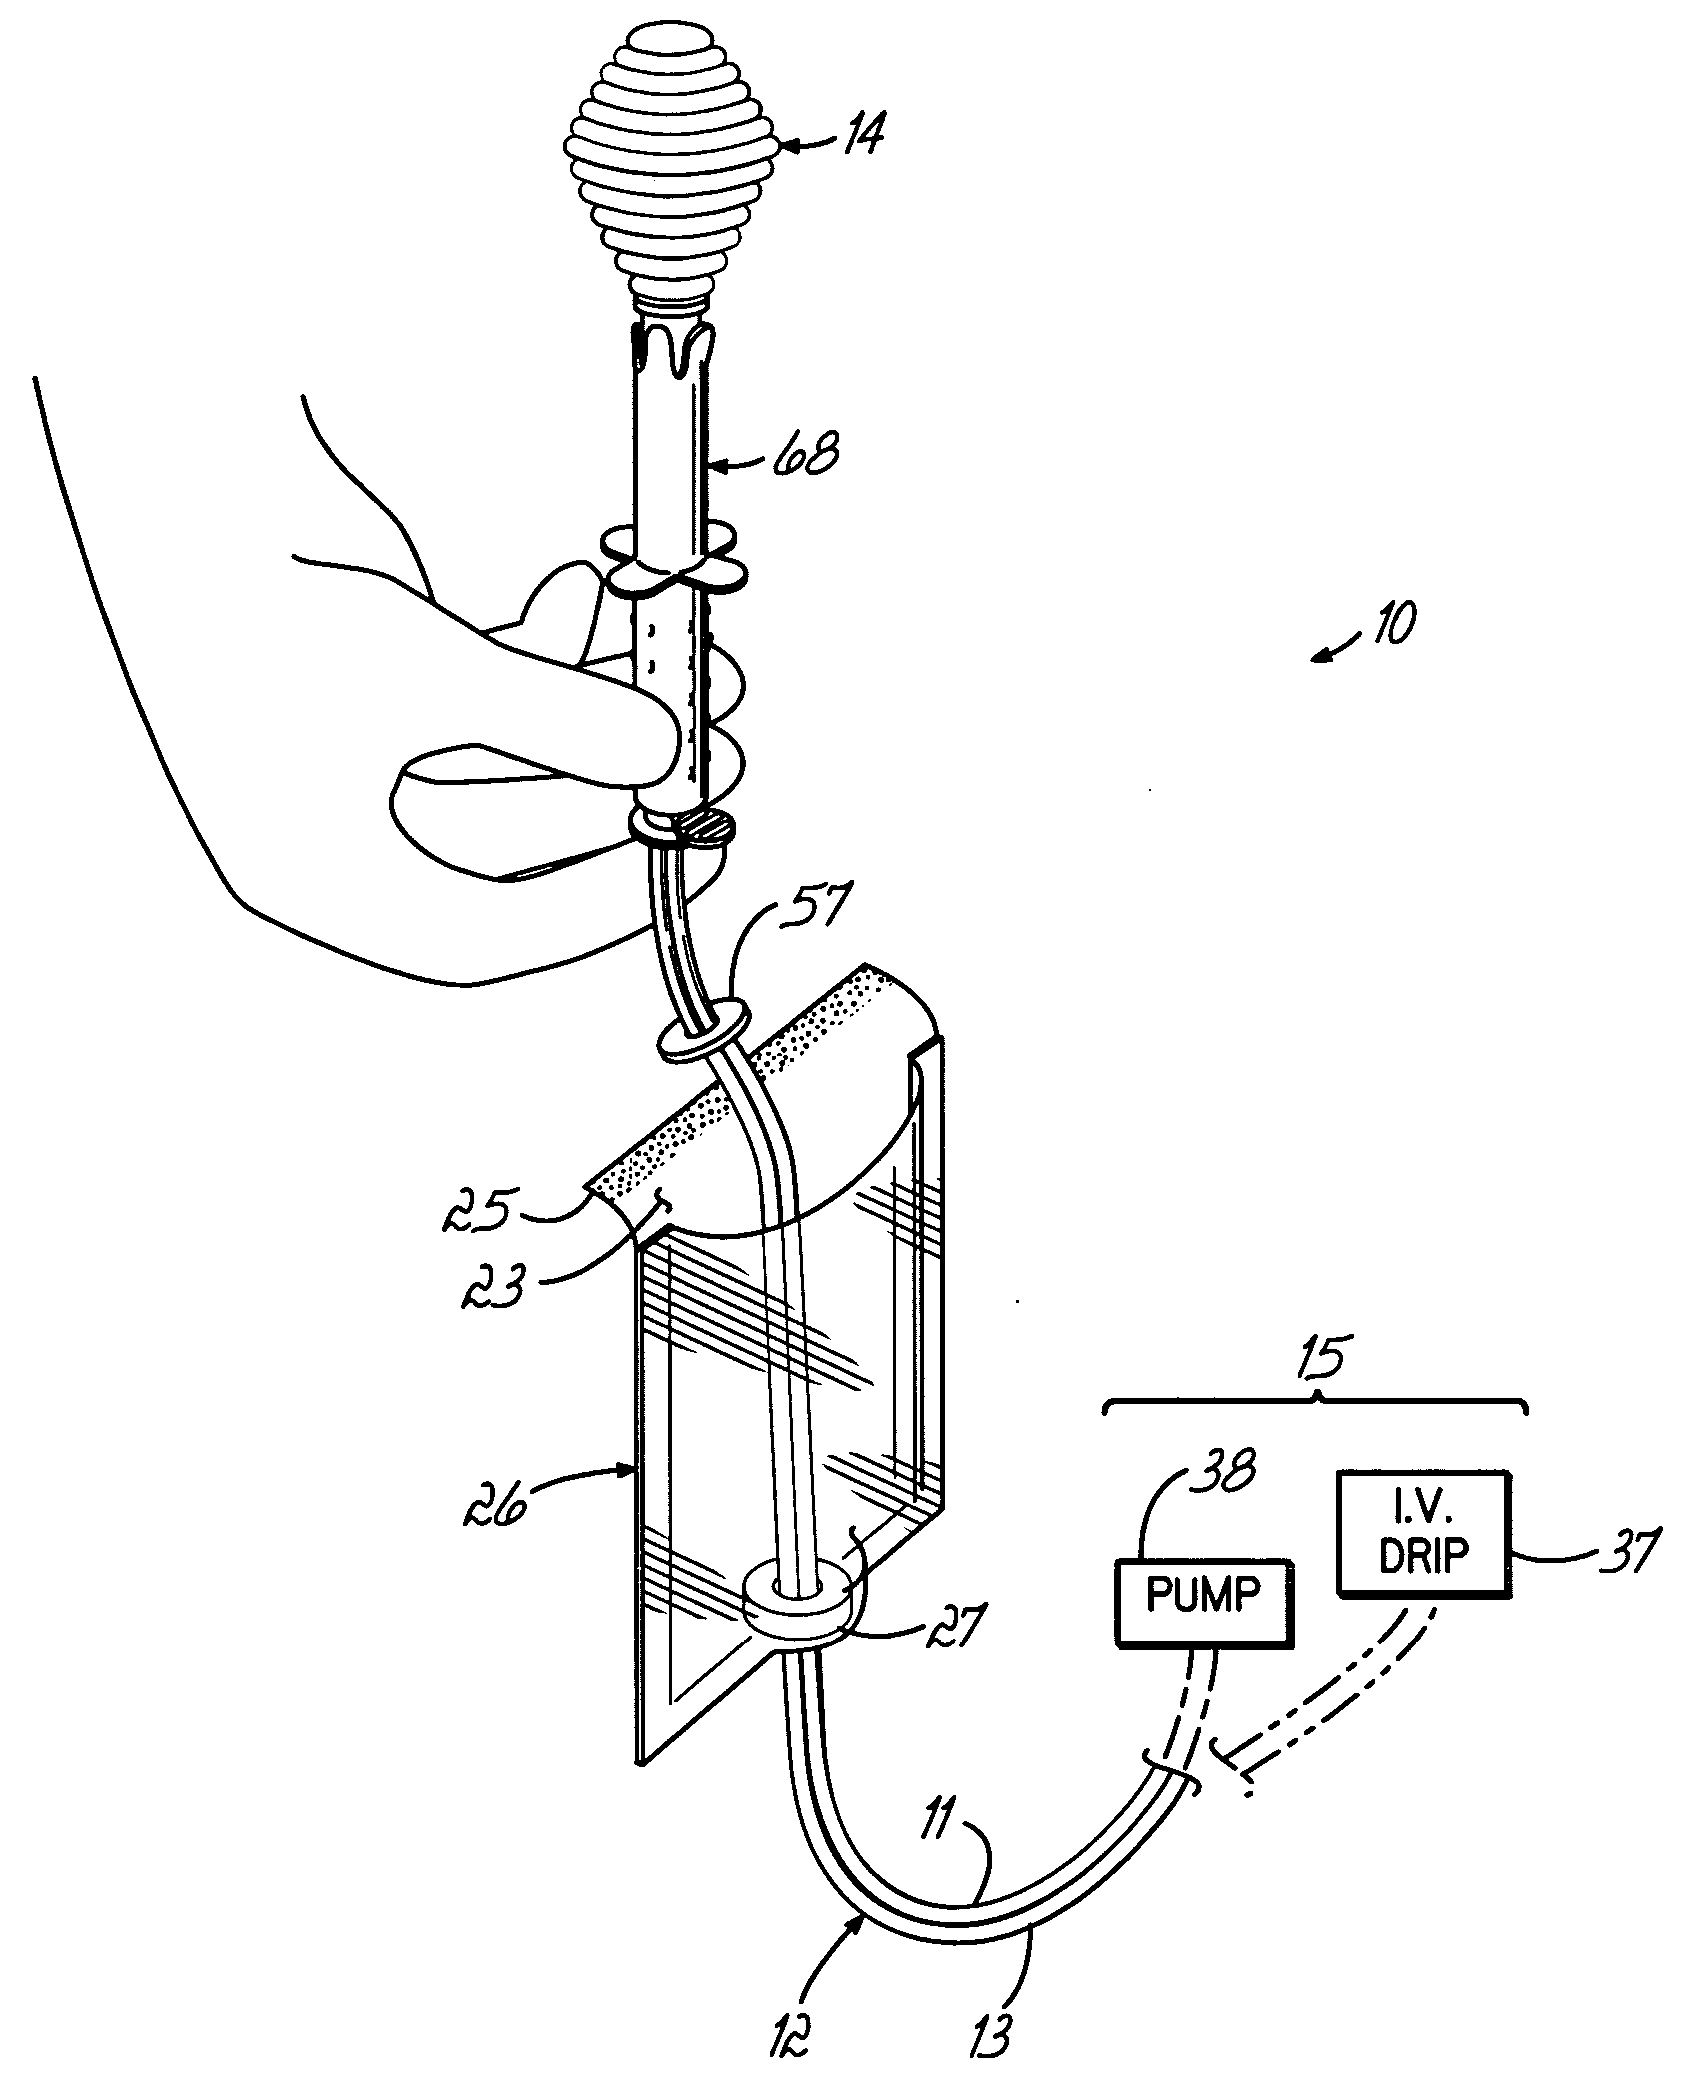 System and method using the rectal mucosal membrane for inducing hypothermia and warming